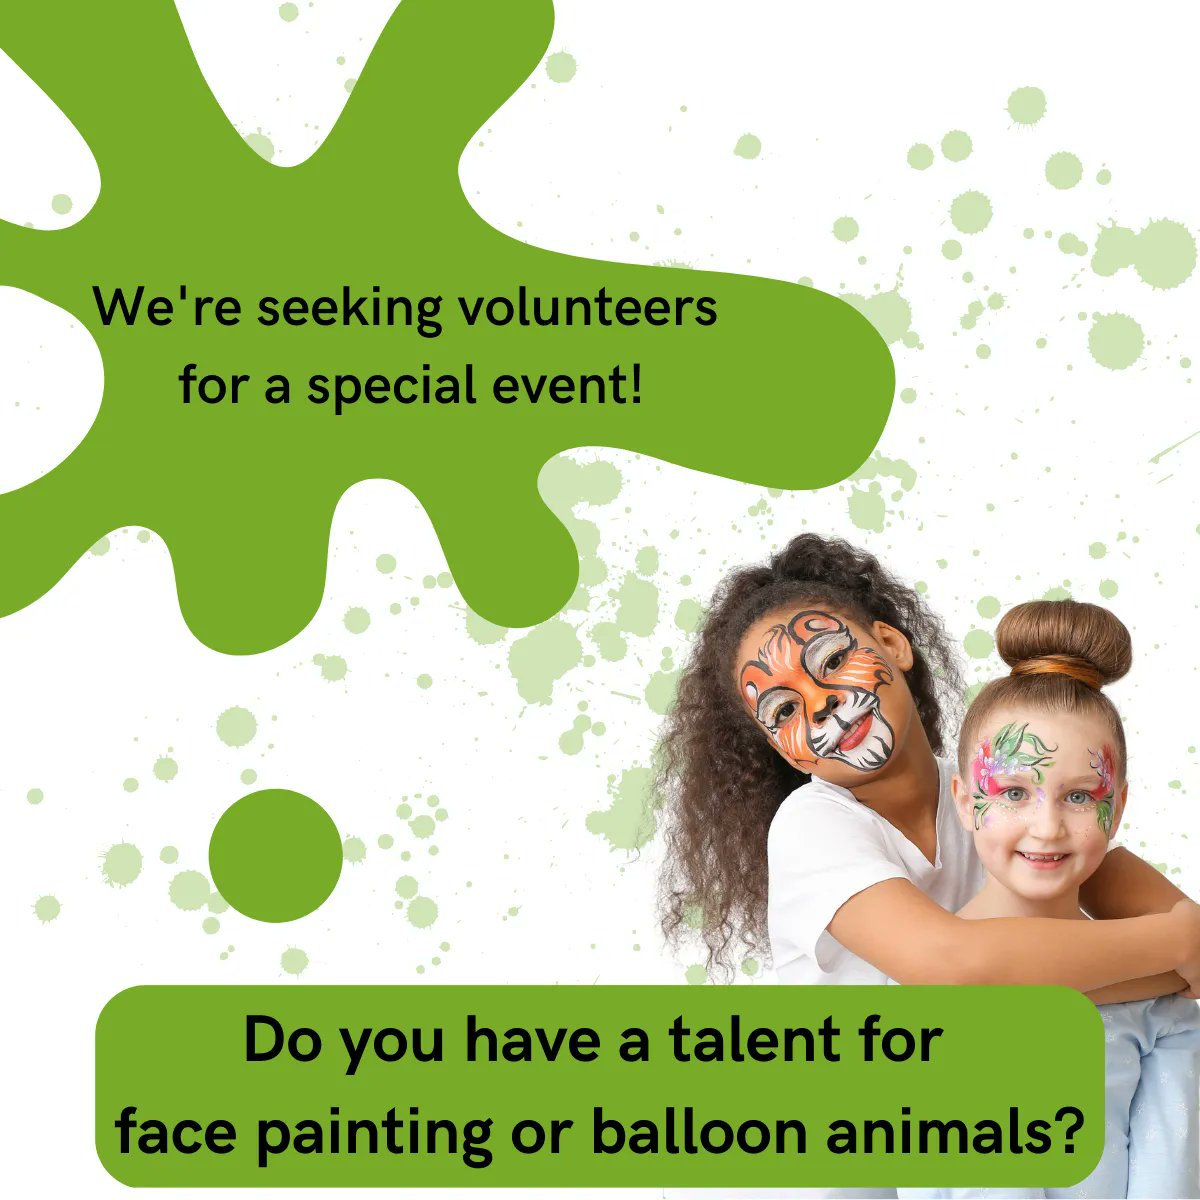 Are you passionate about making kids smile?

We are hosting a family-friendly event on May 20th in Springville, and we are looking for volunteers to help with face painting and balloon animal-making.
Please send us a message if you'd like to help! 
#communityvolunteer #nonprofit